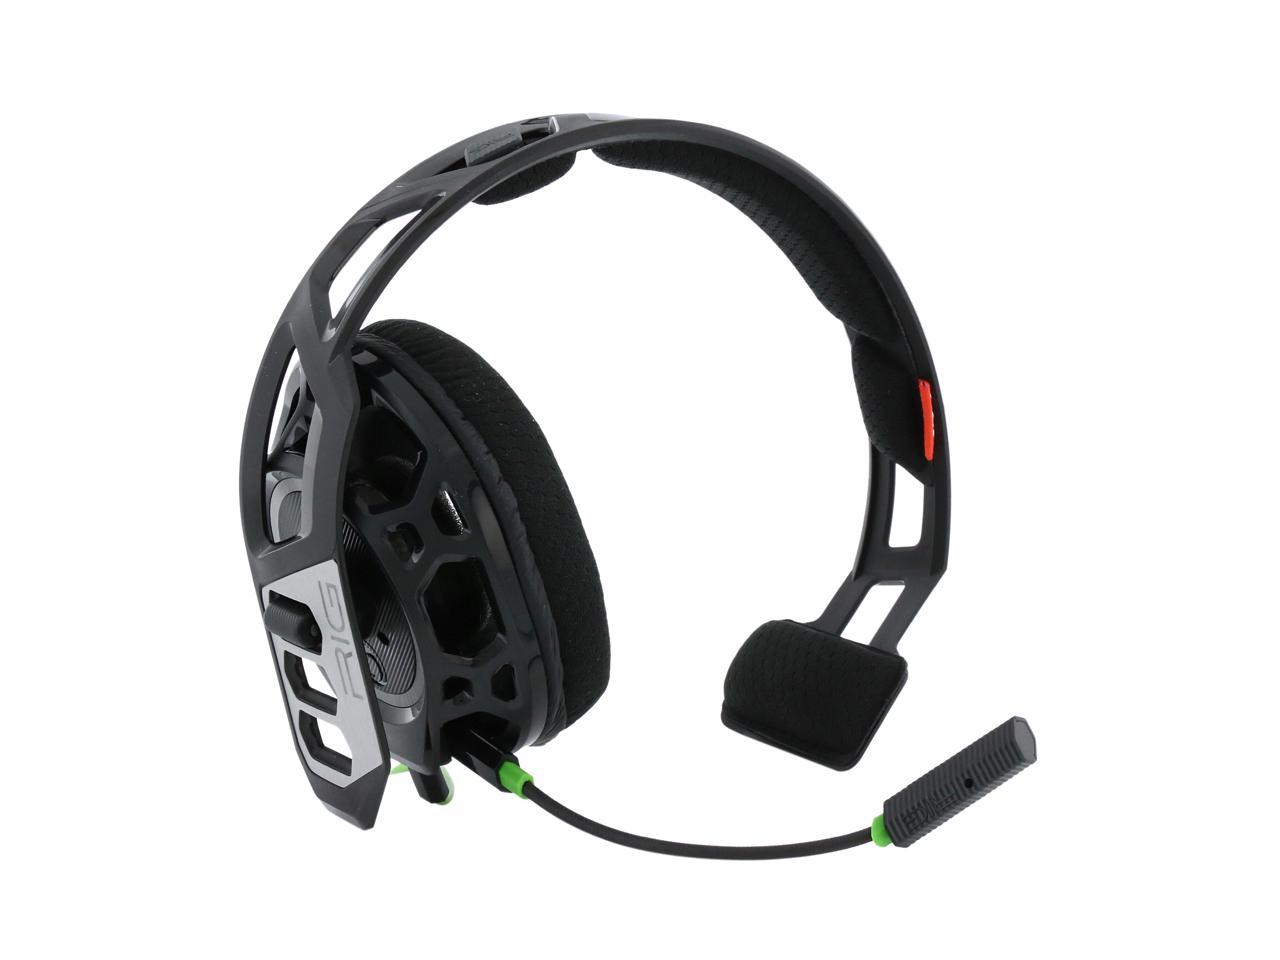 rig 100 headset